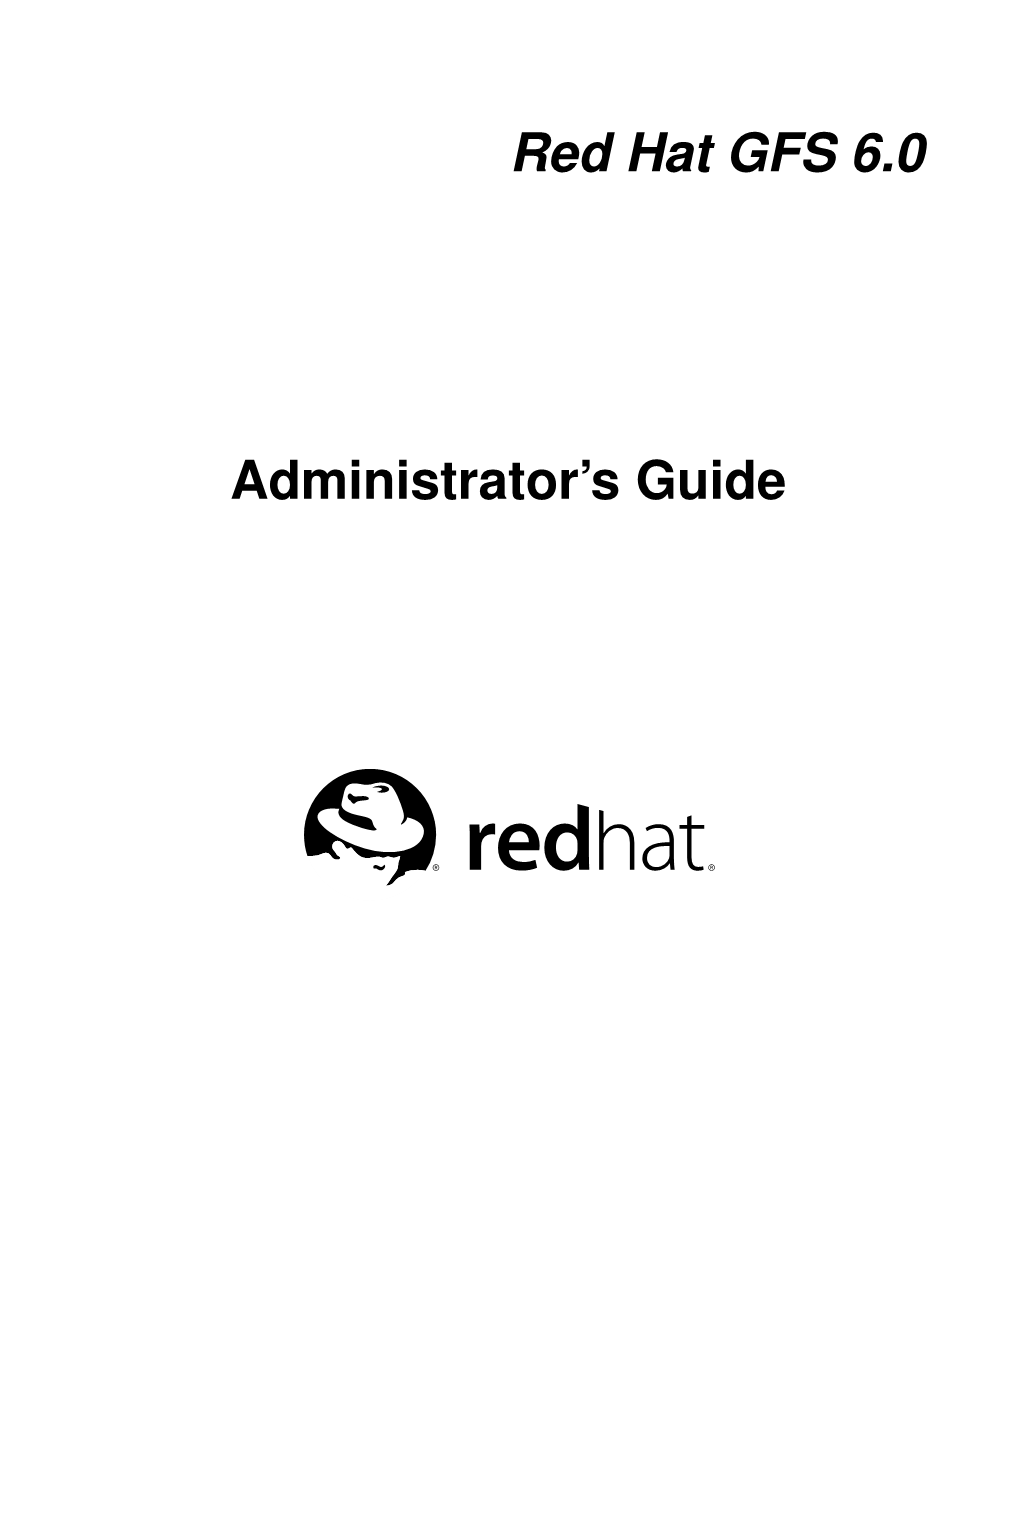 Red Hat GFS 6.0 Administrator's Guide